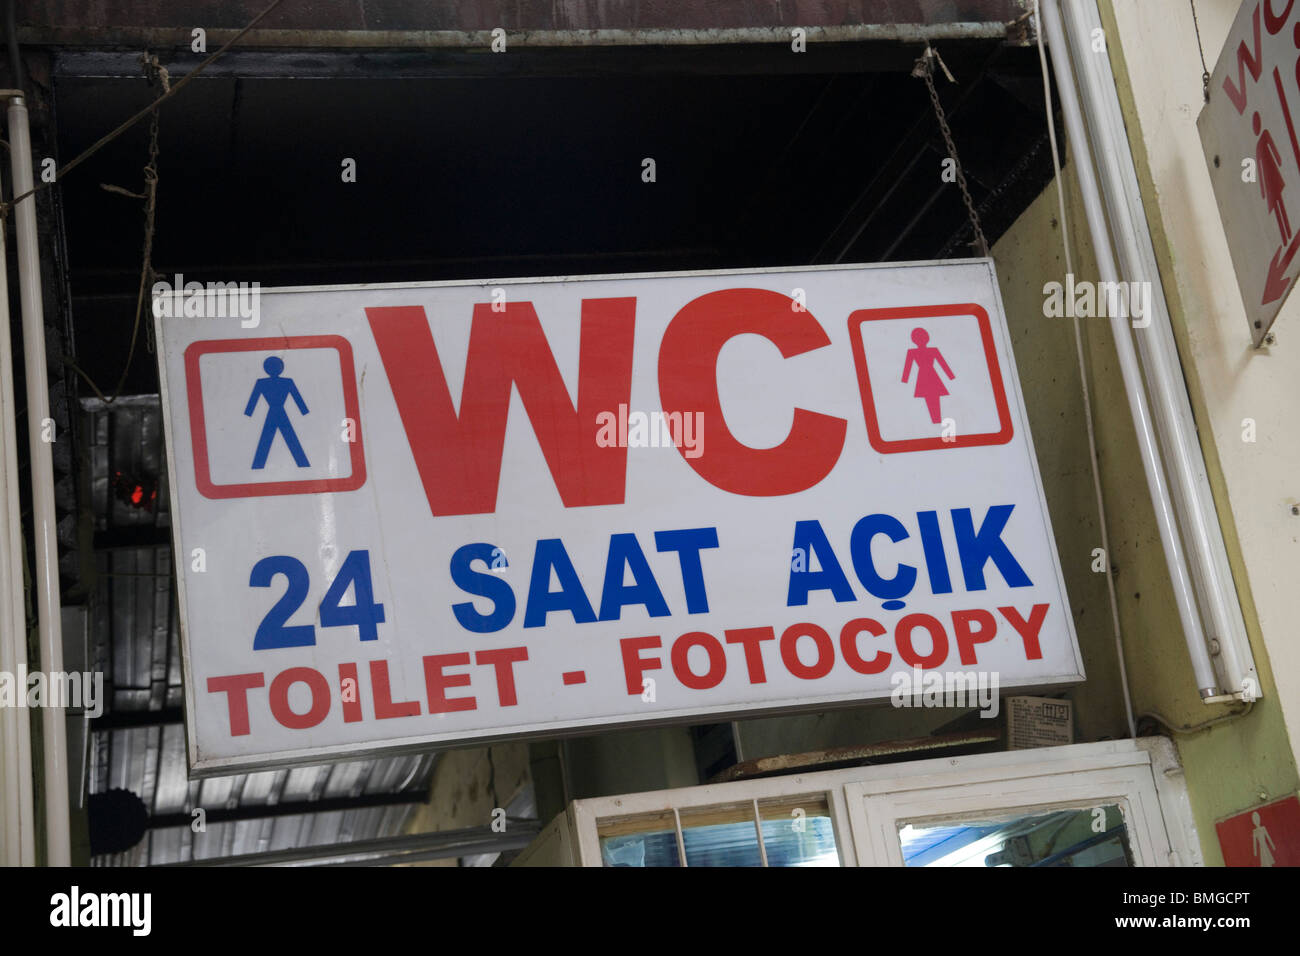 Turkey Antalya - the unexpected combination of a 24hr toilet with photocopying Stock Photo